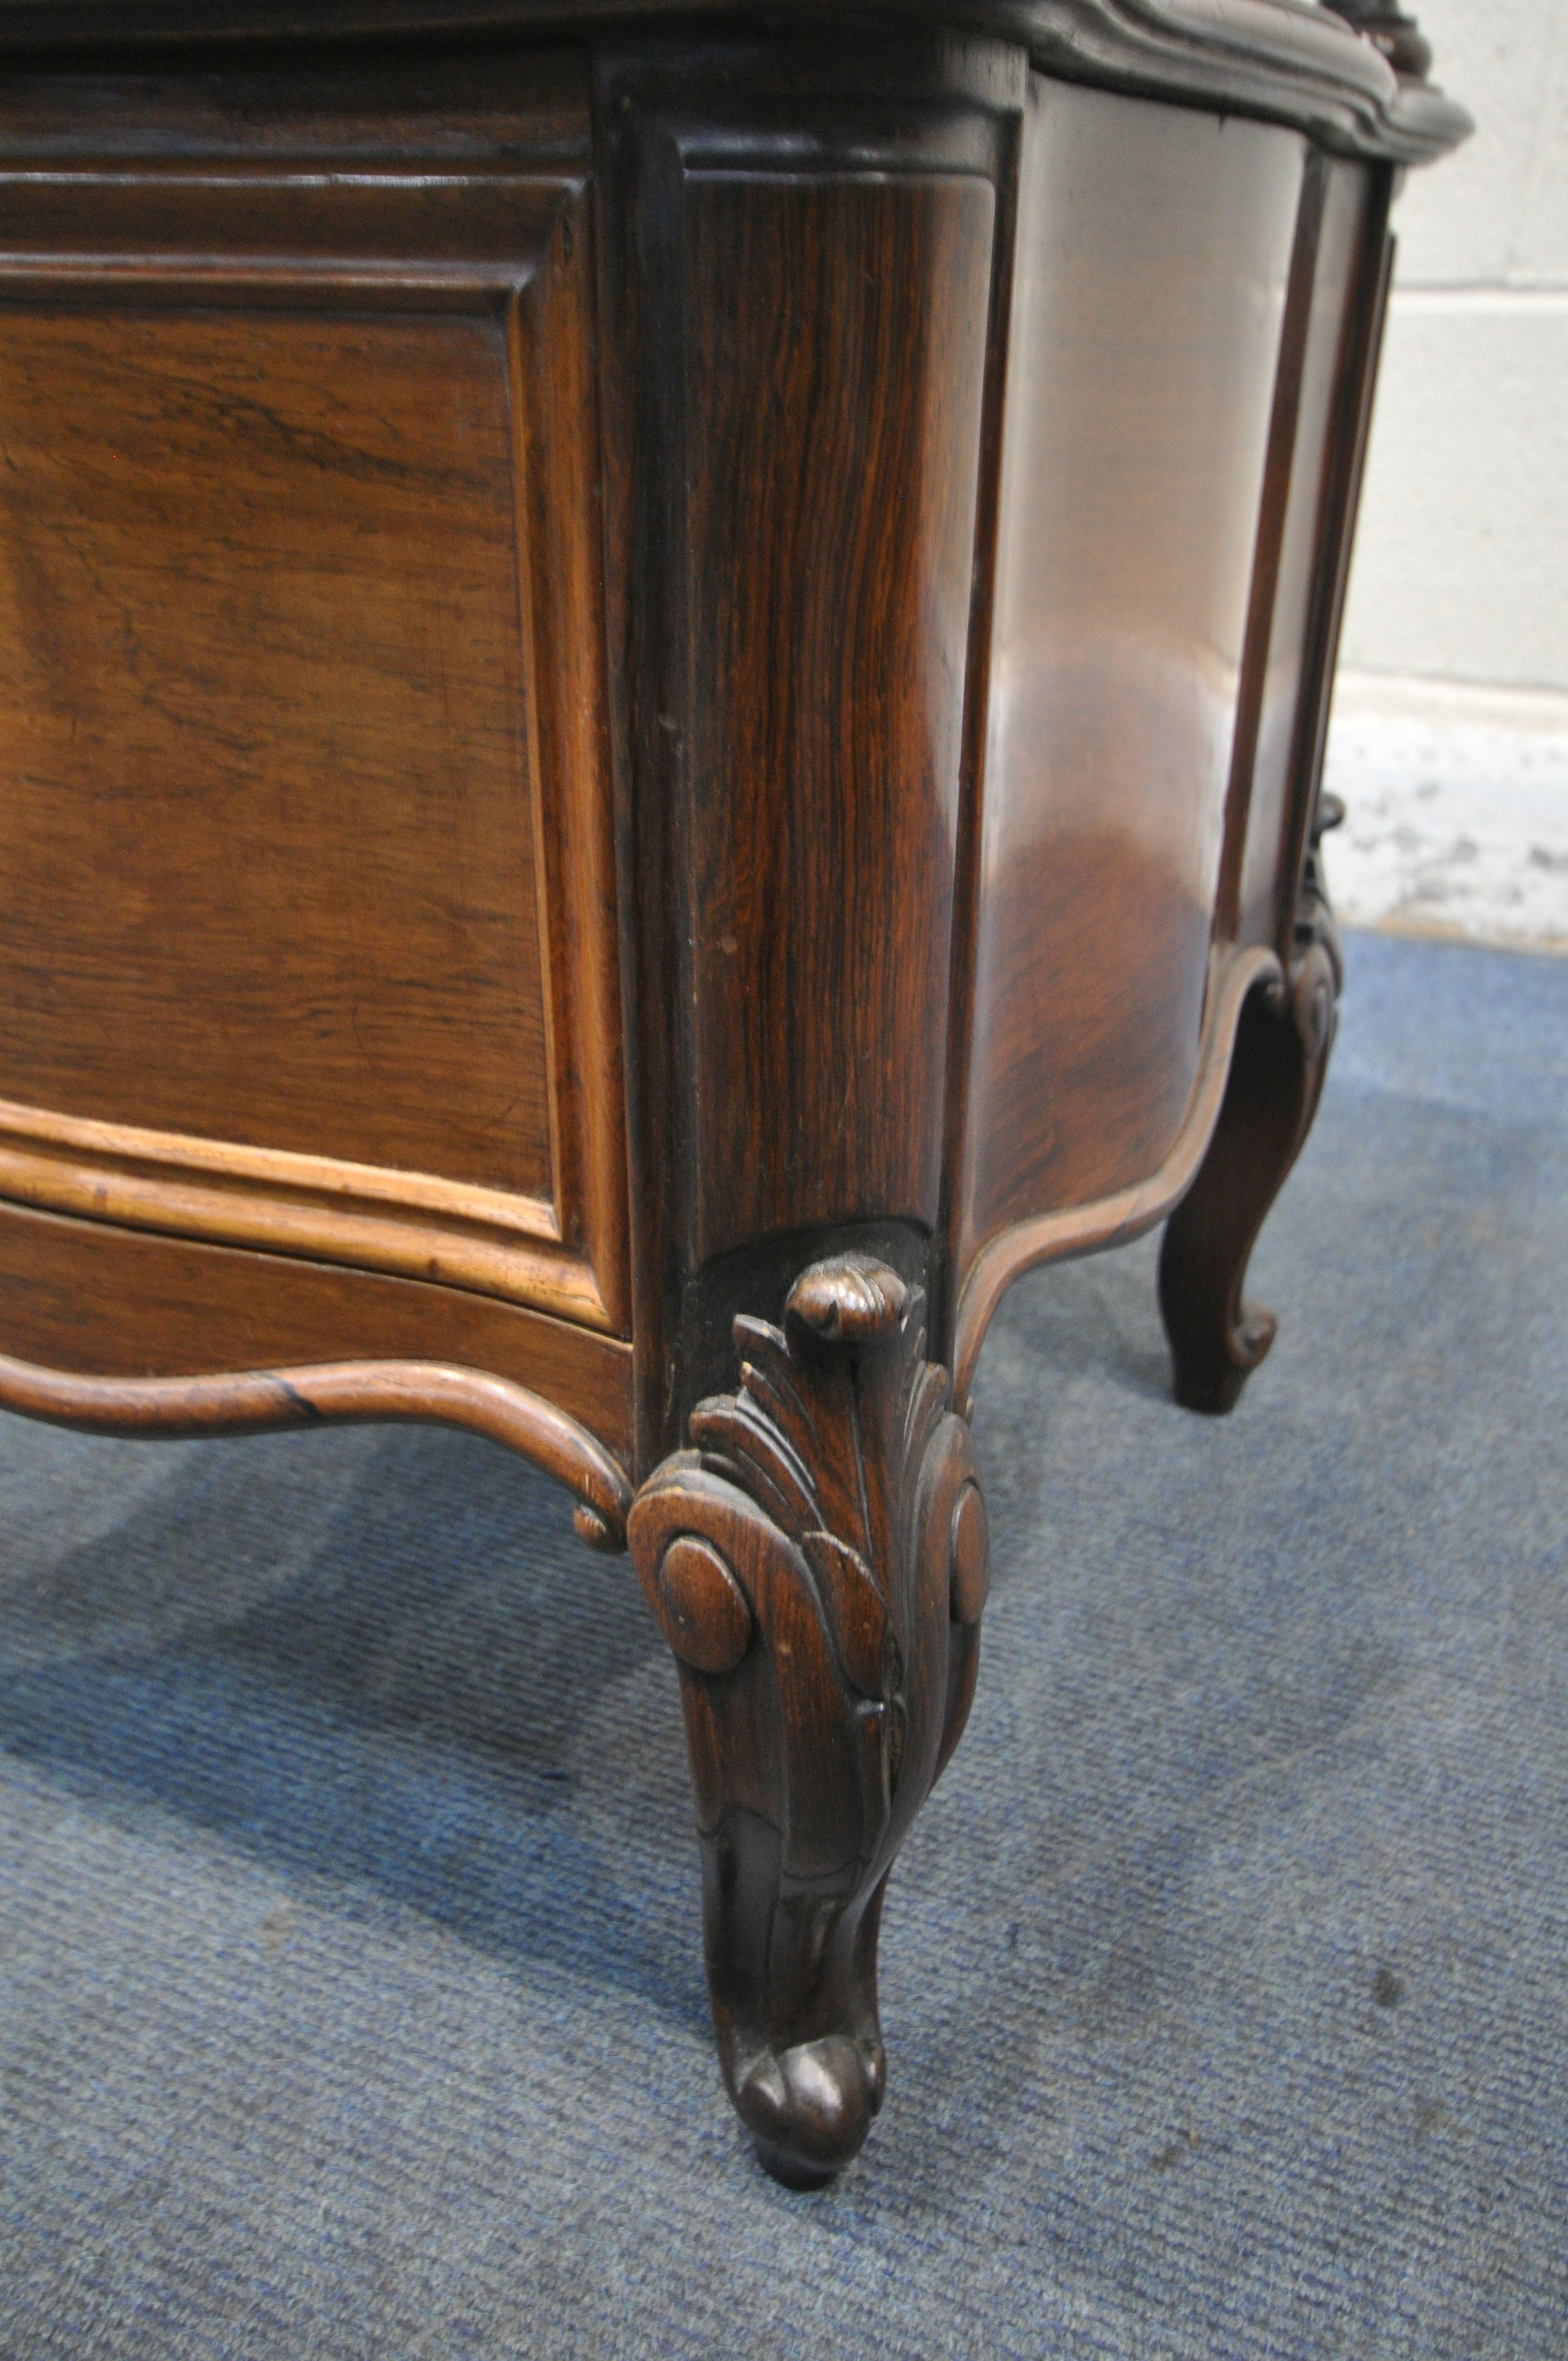 A VICTORIAN STYLE ROSEWOOD VENEER SERPENTINE LAMP TABLE, with a marquetry inlaid top, single drawer, - Image 6 of 6